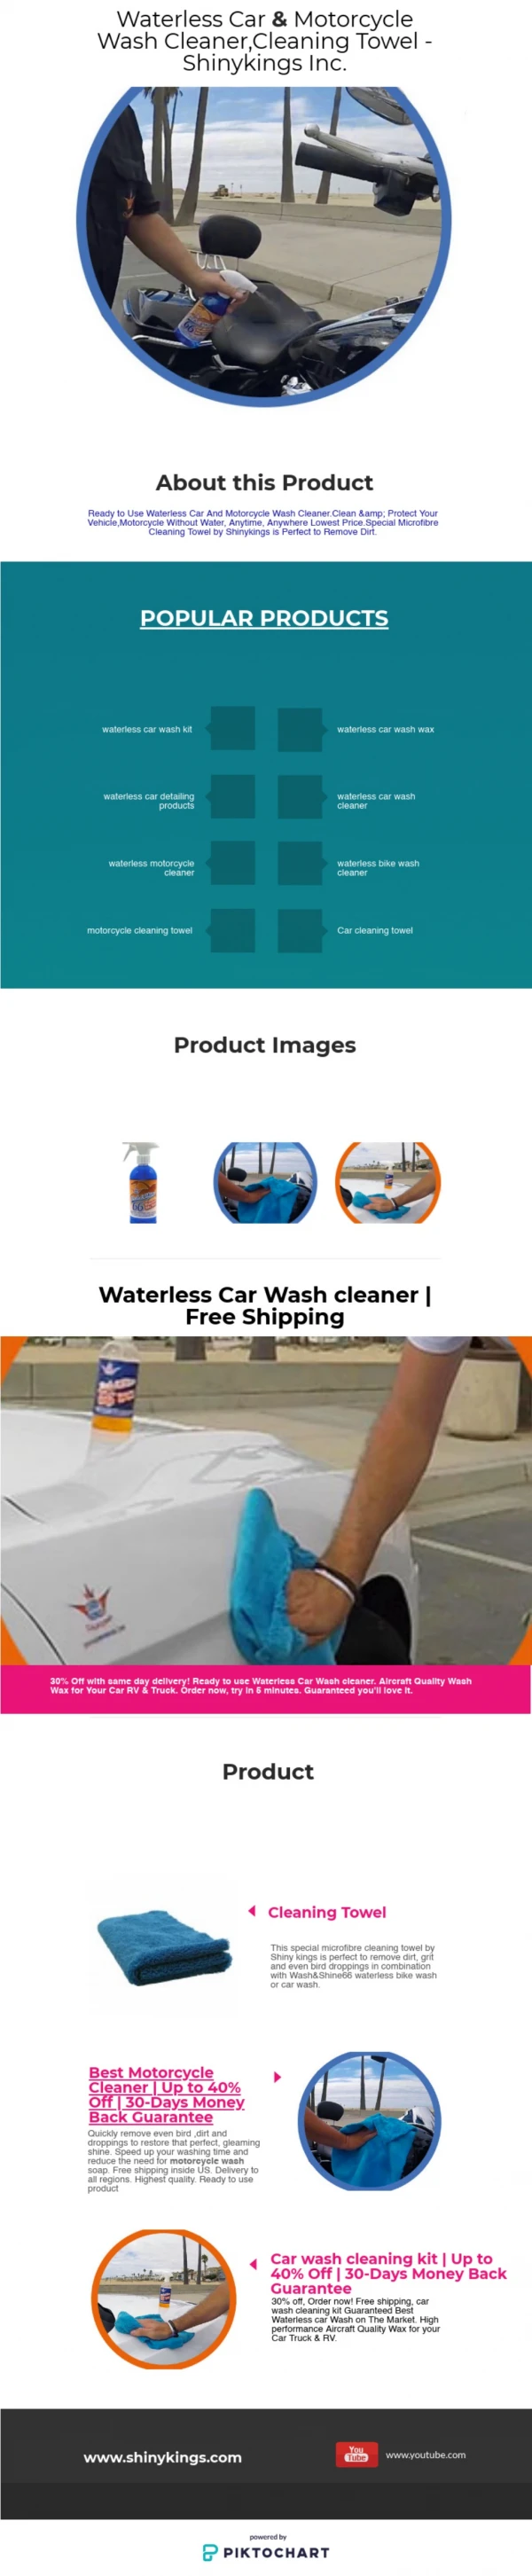 Waterless Motorcycle Cleaner | Free Shipping | Up to 30% Off